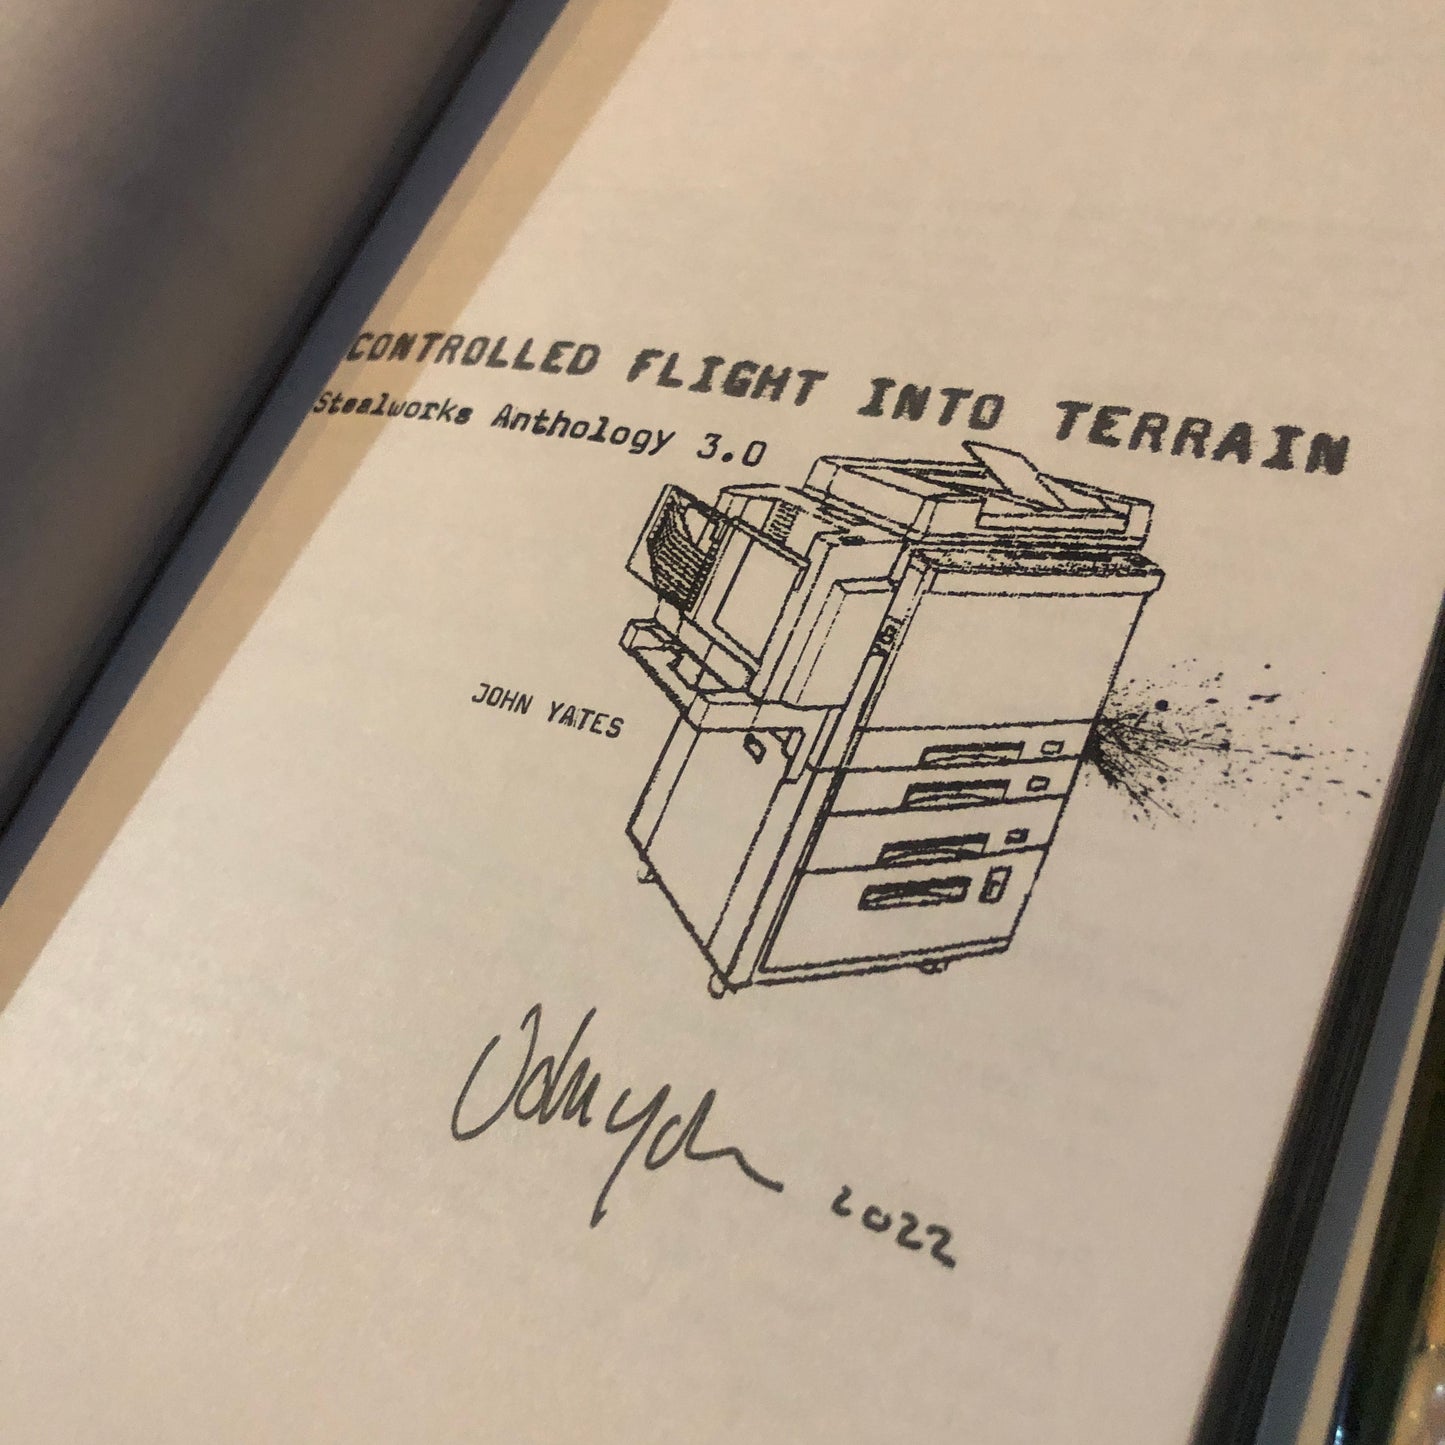 Stealworks "Controlled Flight Into Terrain: Stealworks Anthology 3.0" Book